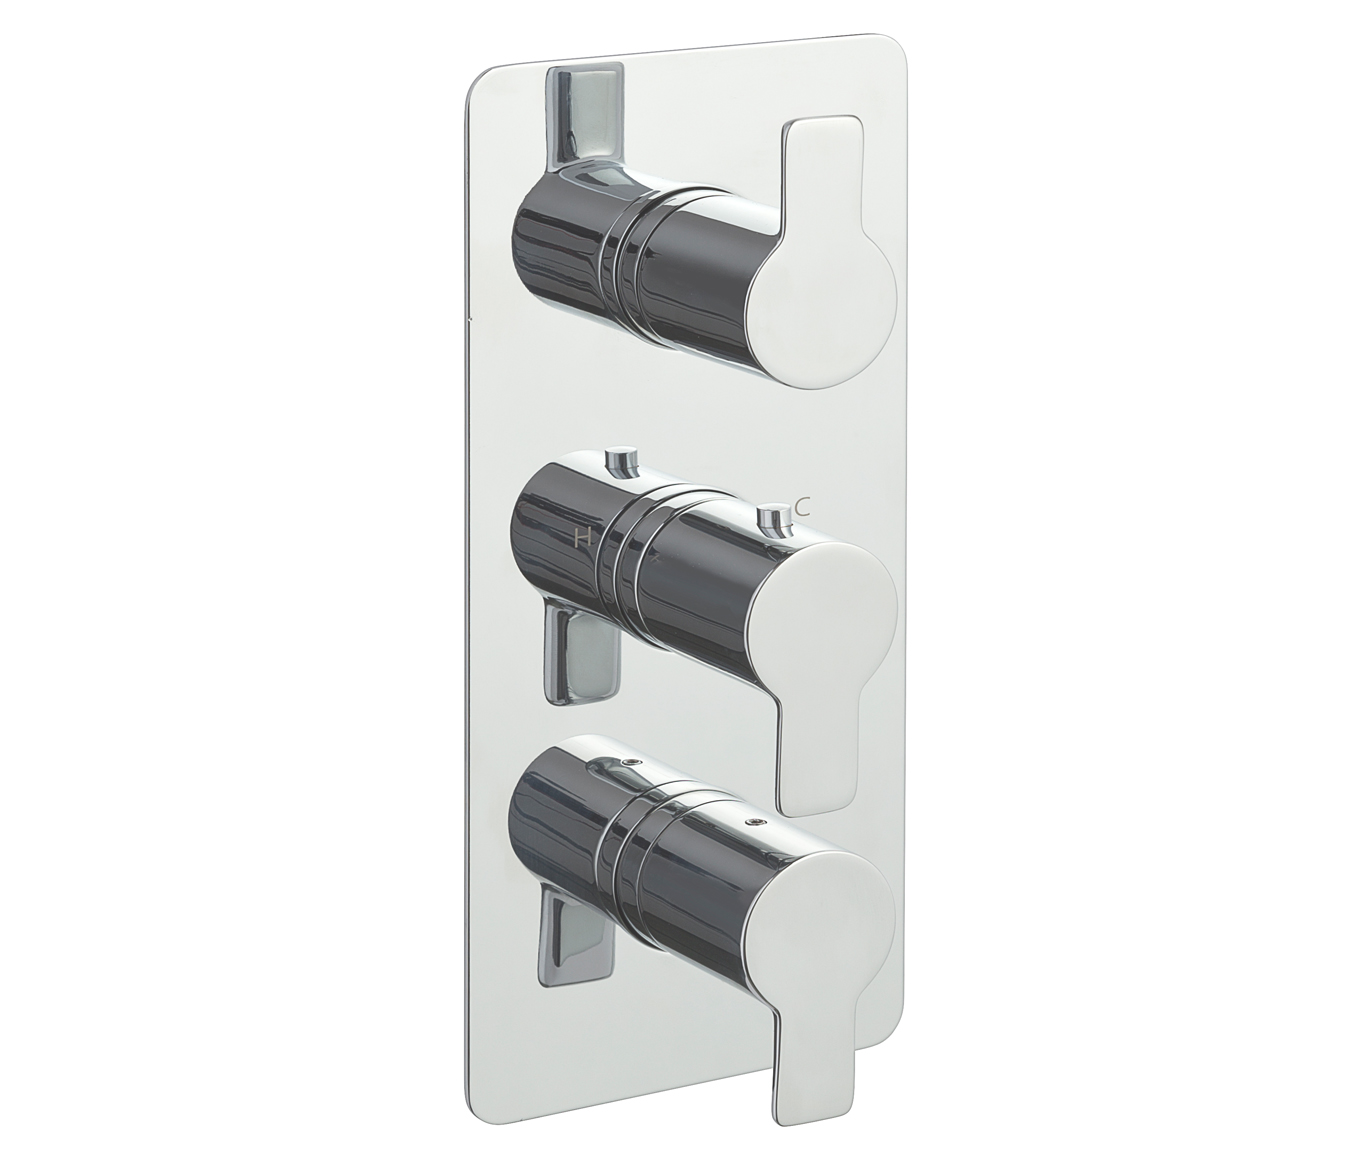 Amore 2 Outlets Thermostat 79690